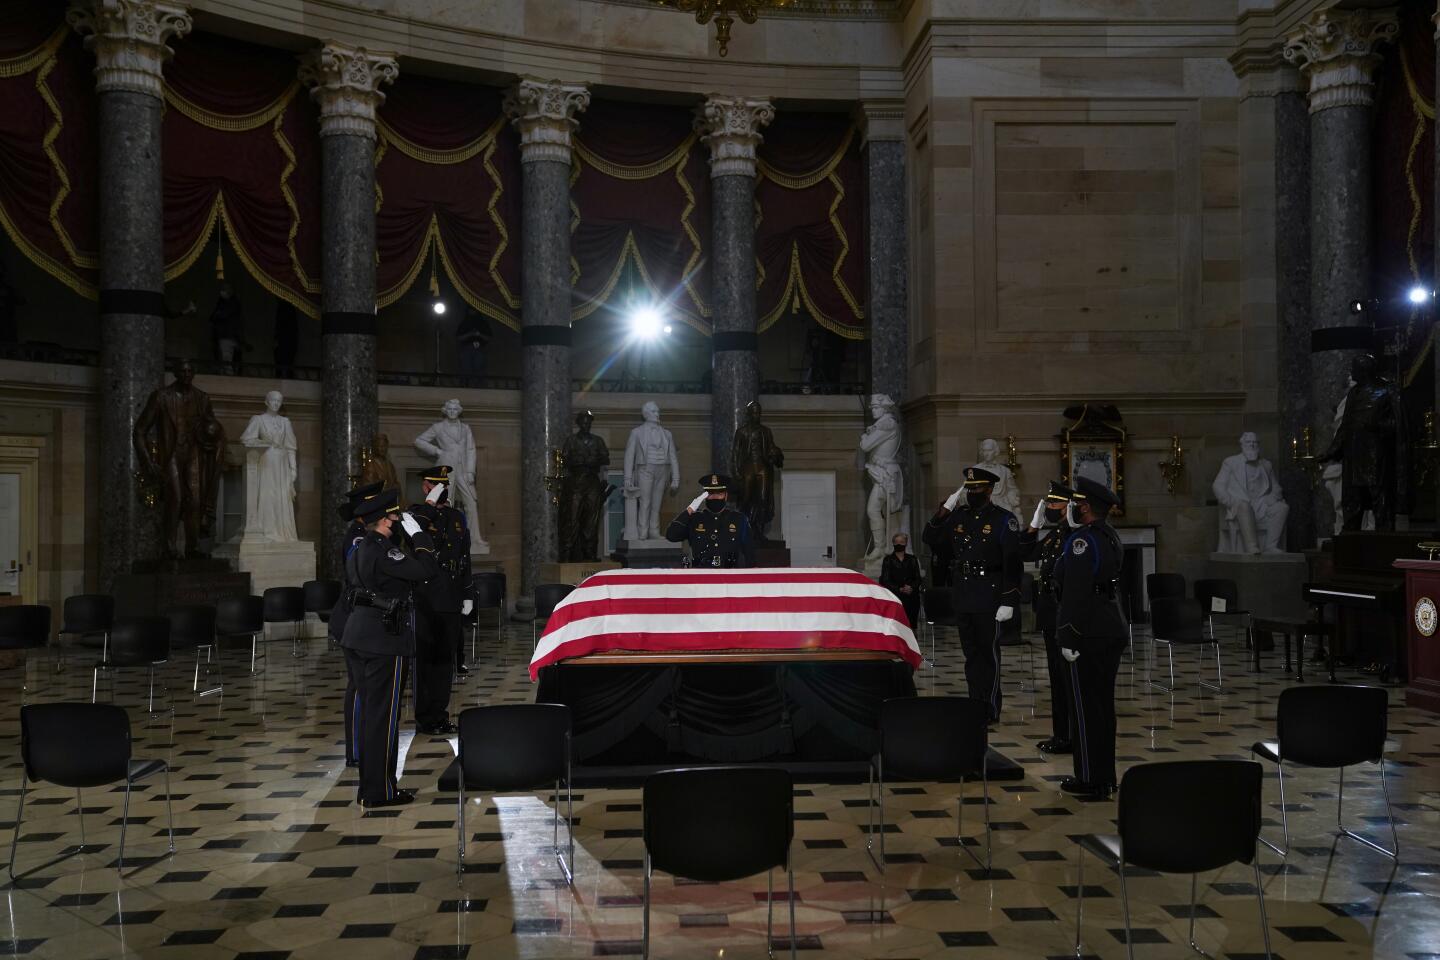 Justice Ruth Bader Ginsburg lies in state at U.S. Capitol